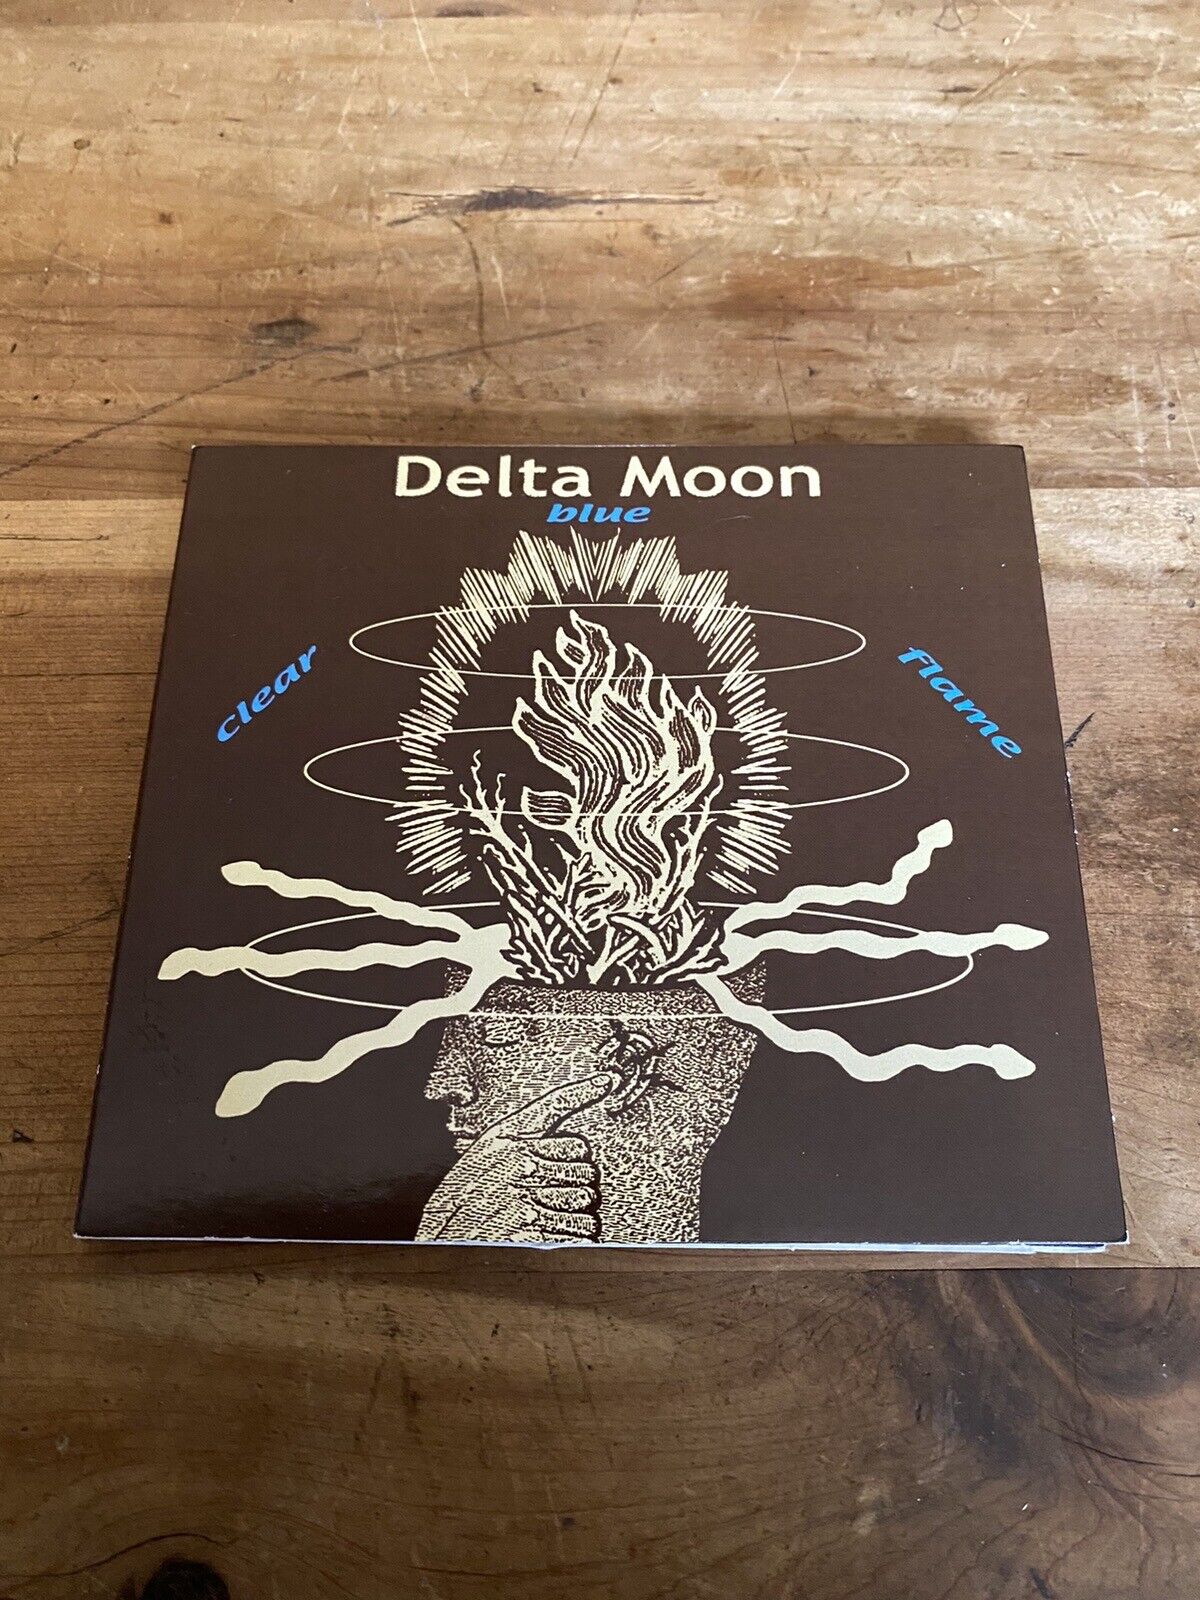 Delta Moon - Clear Blue Flame CD, Rare Delta Blues (Free Shipping In Canada)